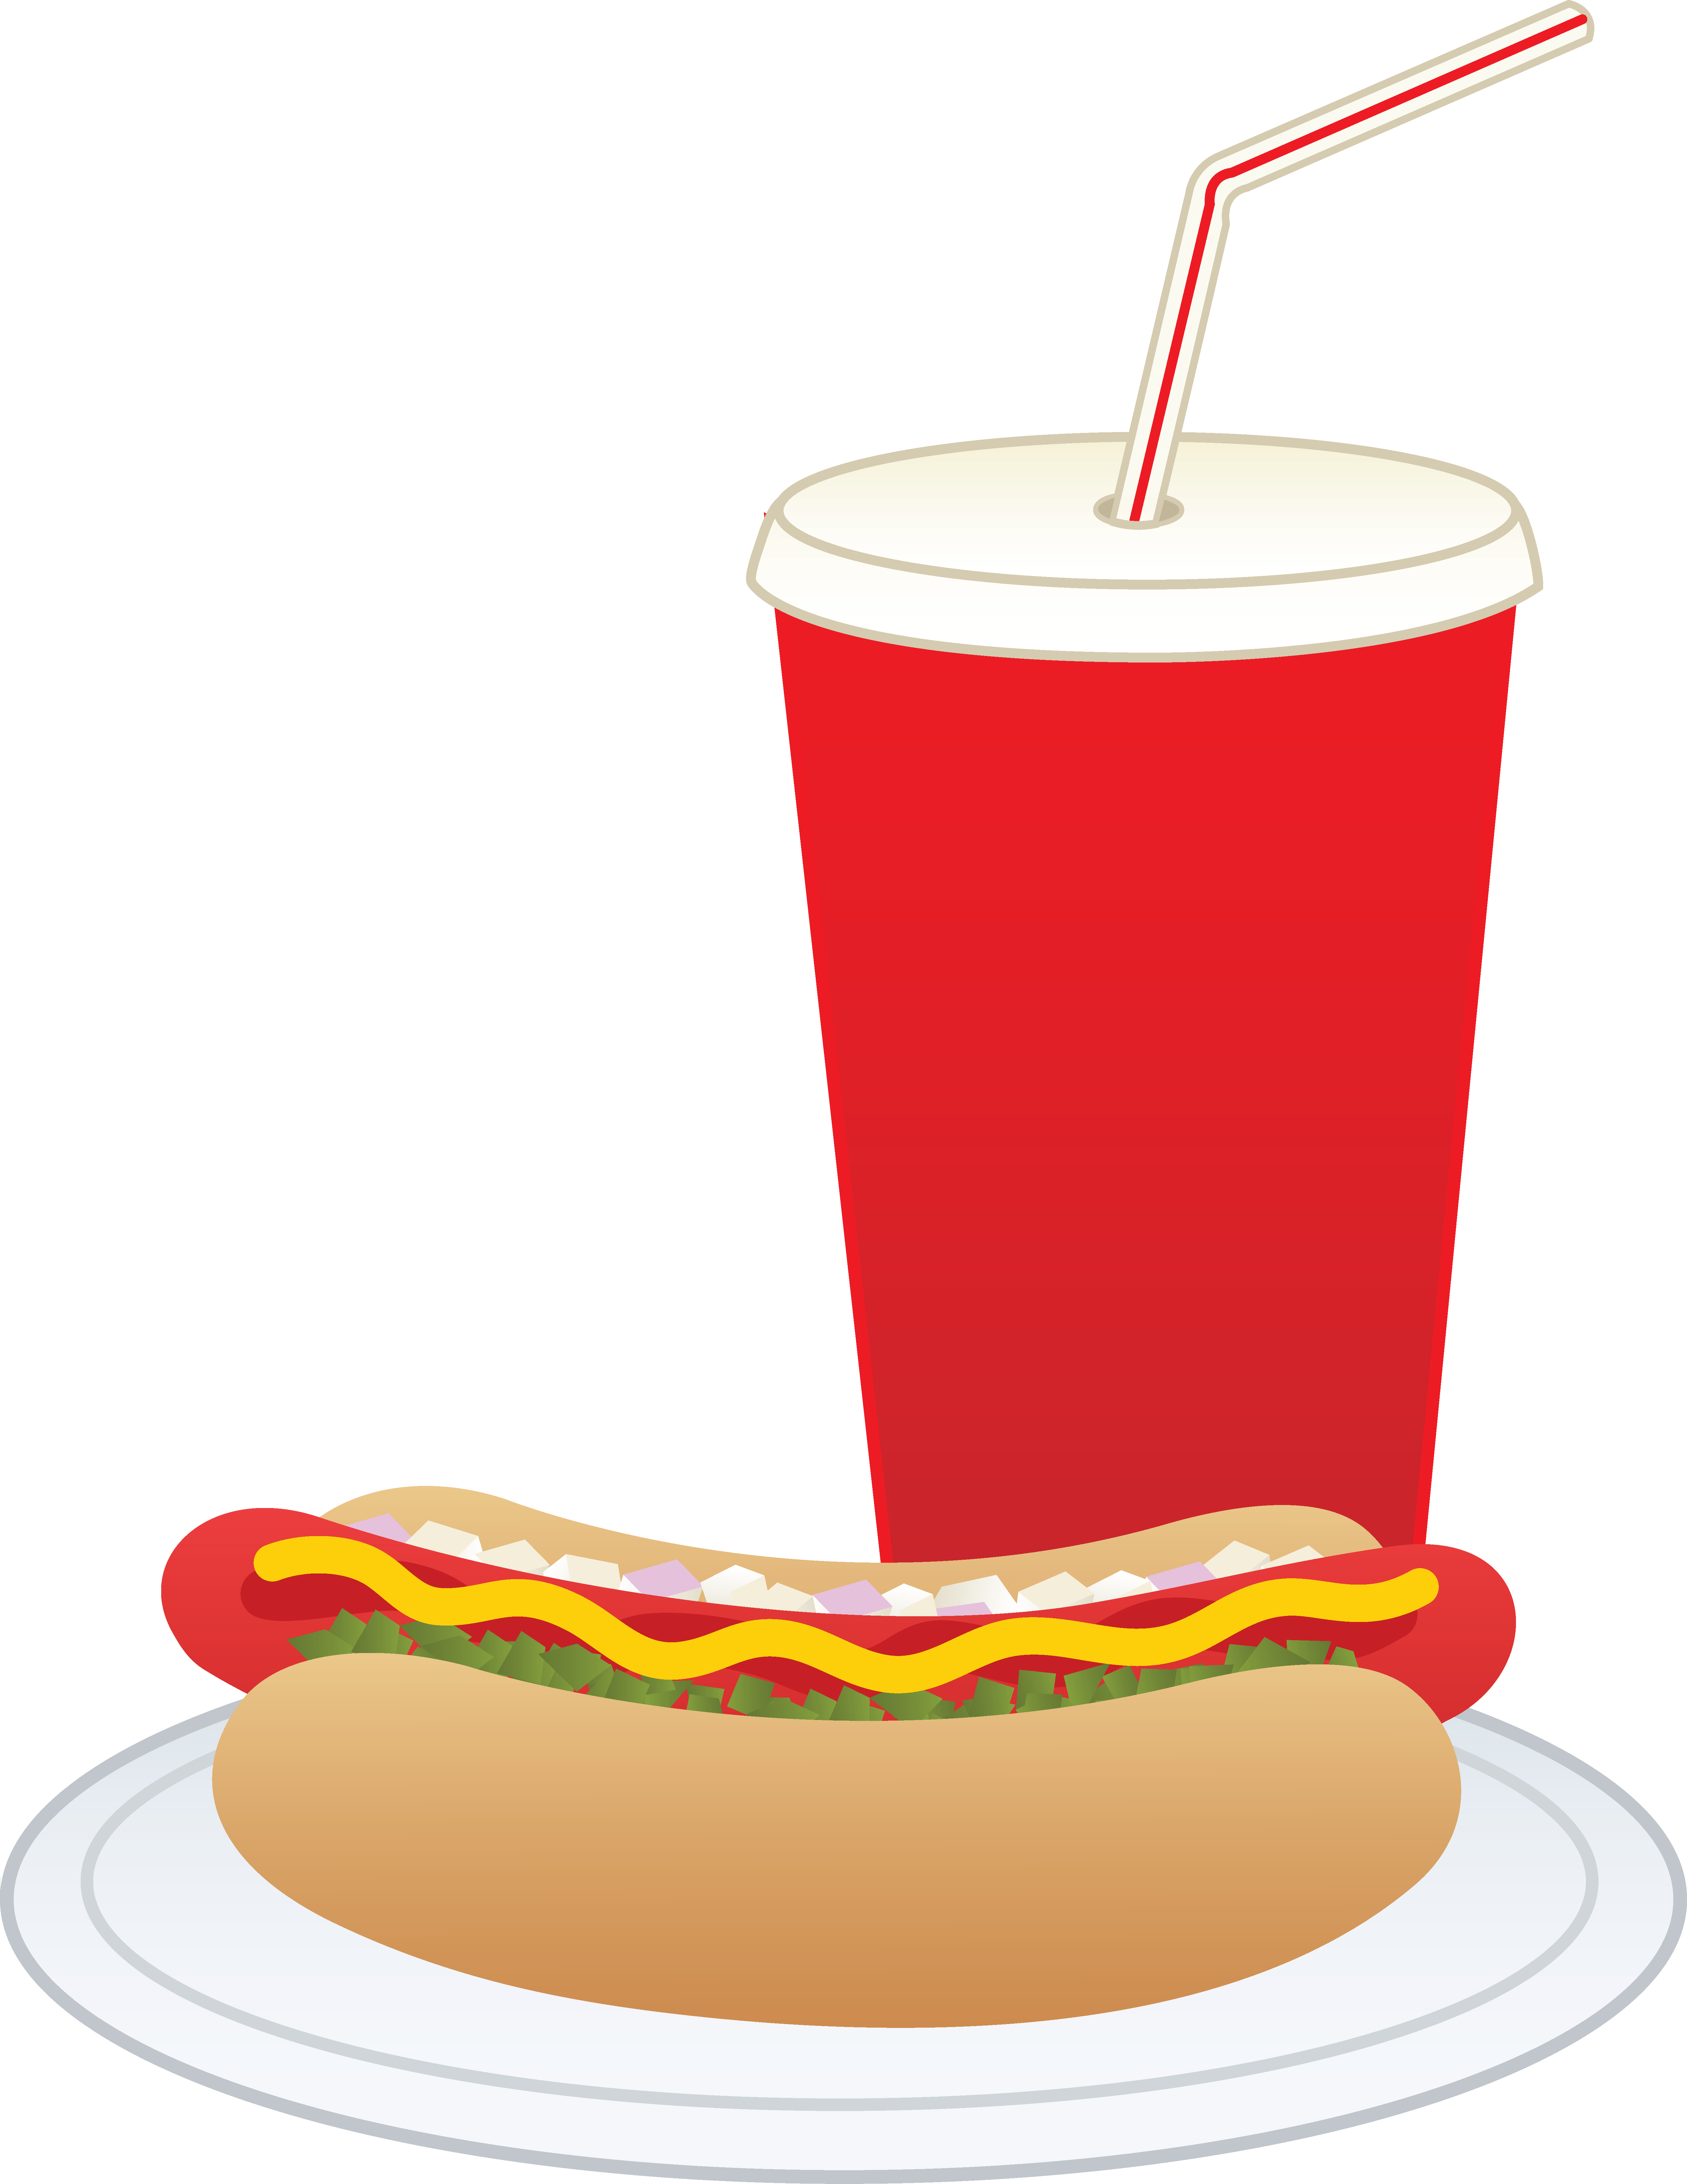 Hot Dog and Soft Drink - Free Clip Art